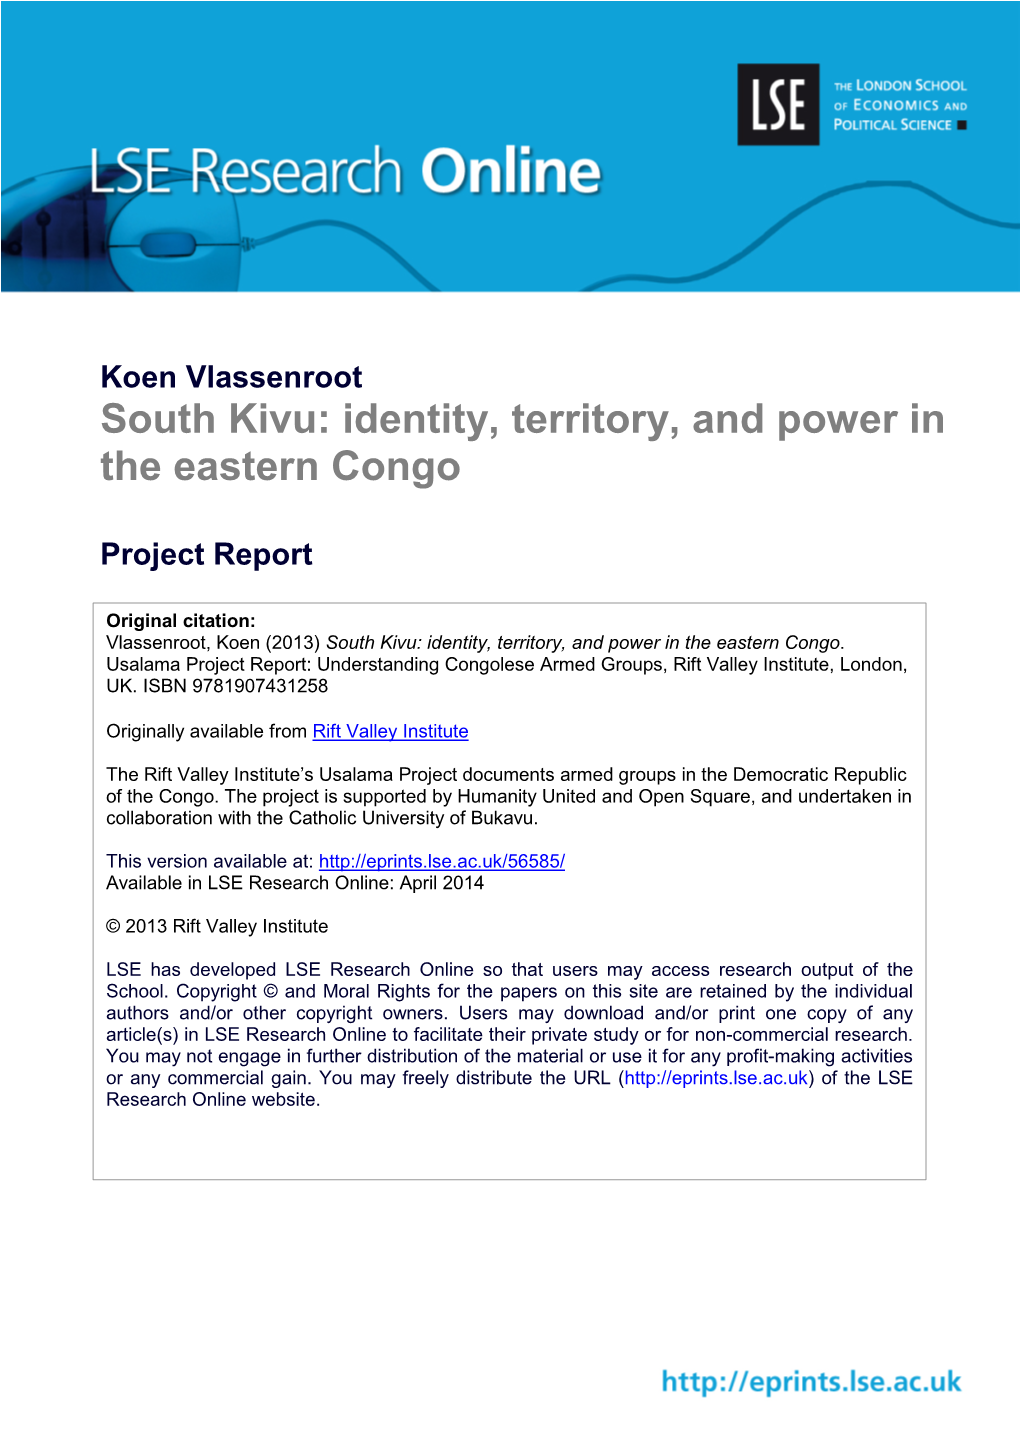 South Kivu: Identity, Territory, and Power in the Eastern Congo